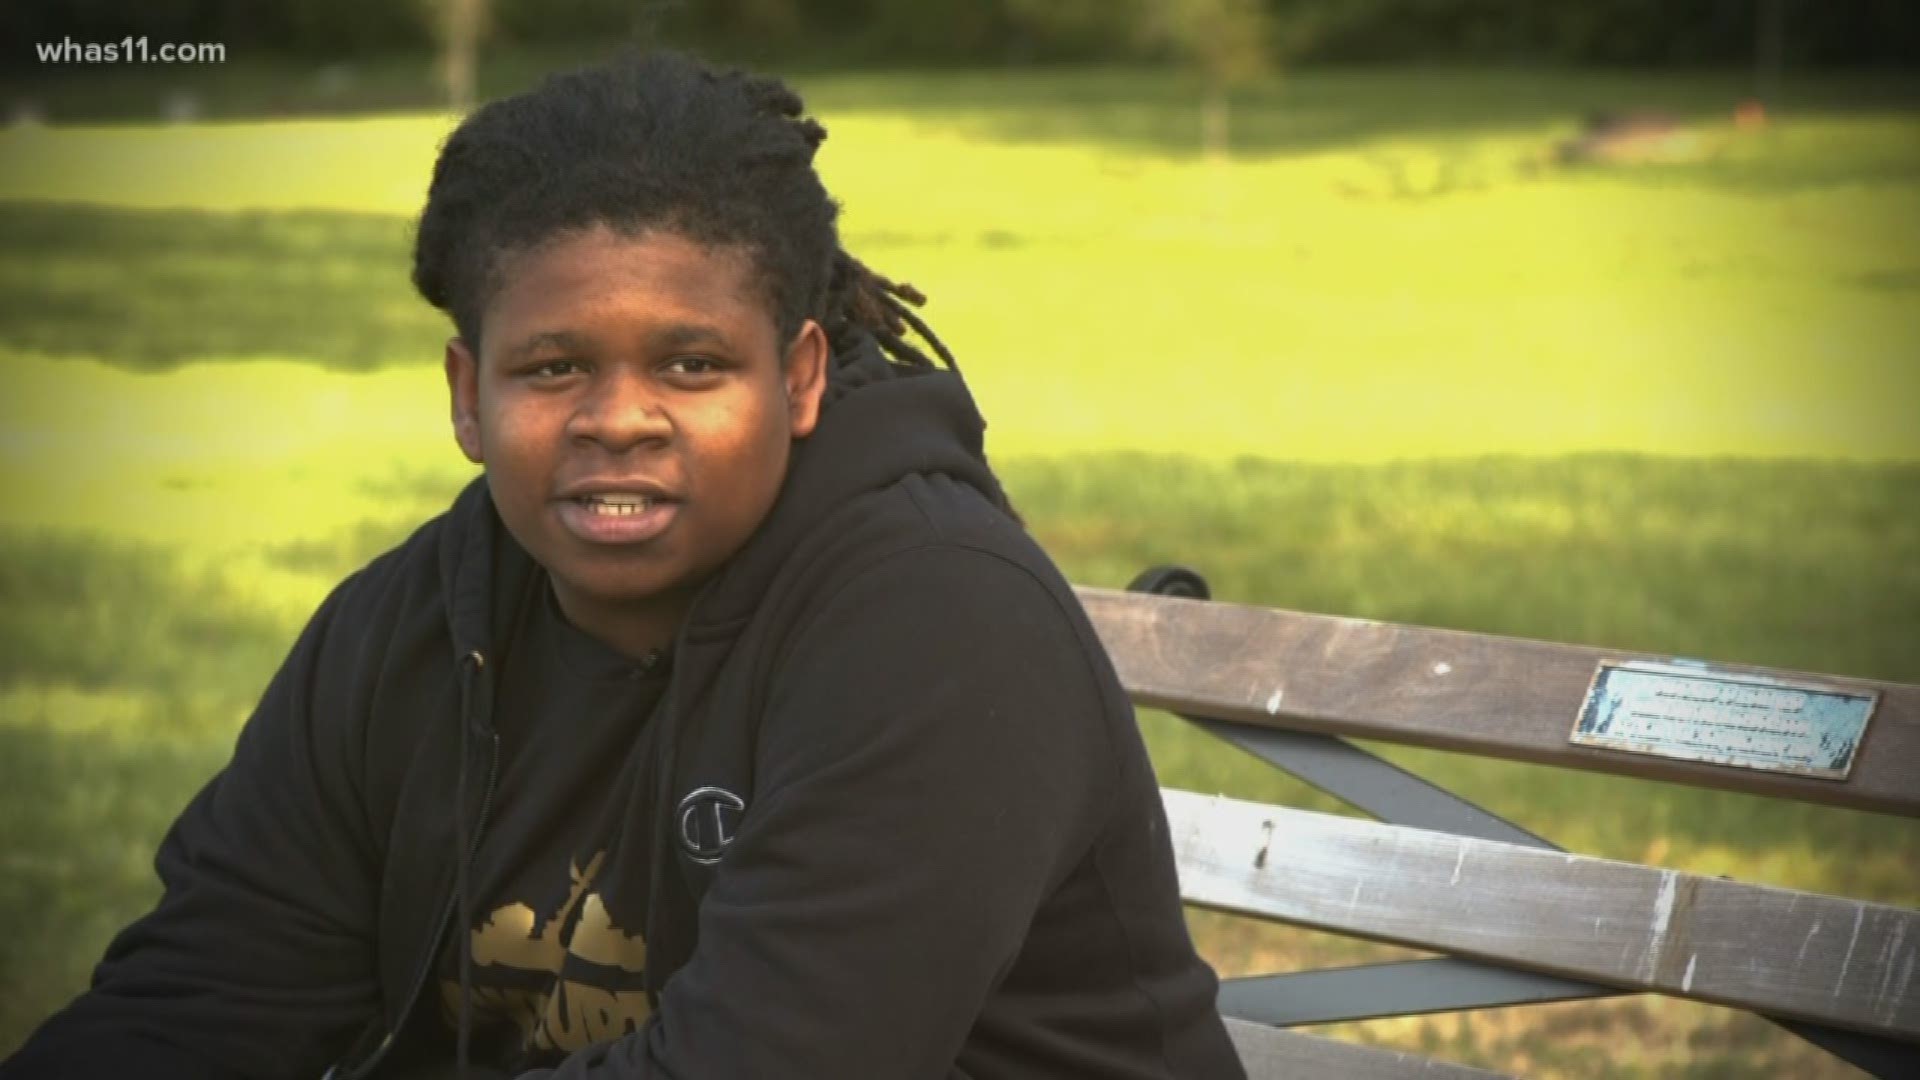 Turning tragedy into triumph, Travis Durham started mowing lawns for therapy at age 14. Now, his non-profit cleans the city and changes the hearts of other kids.